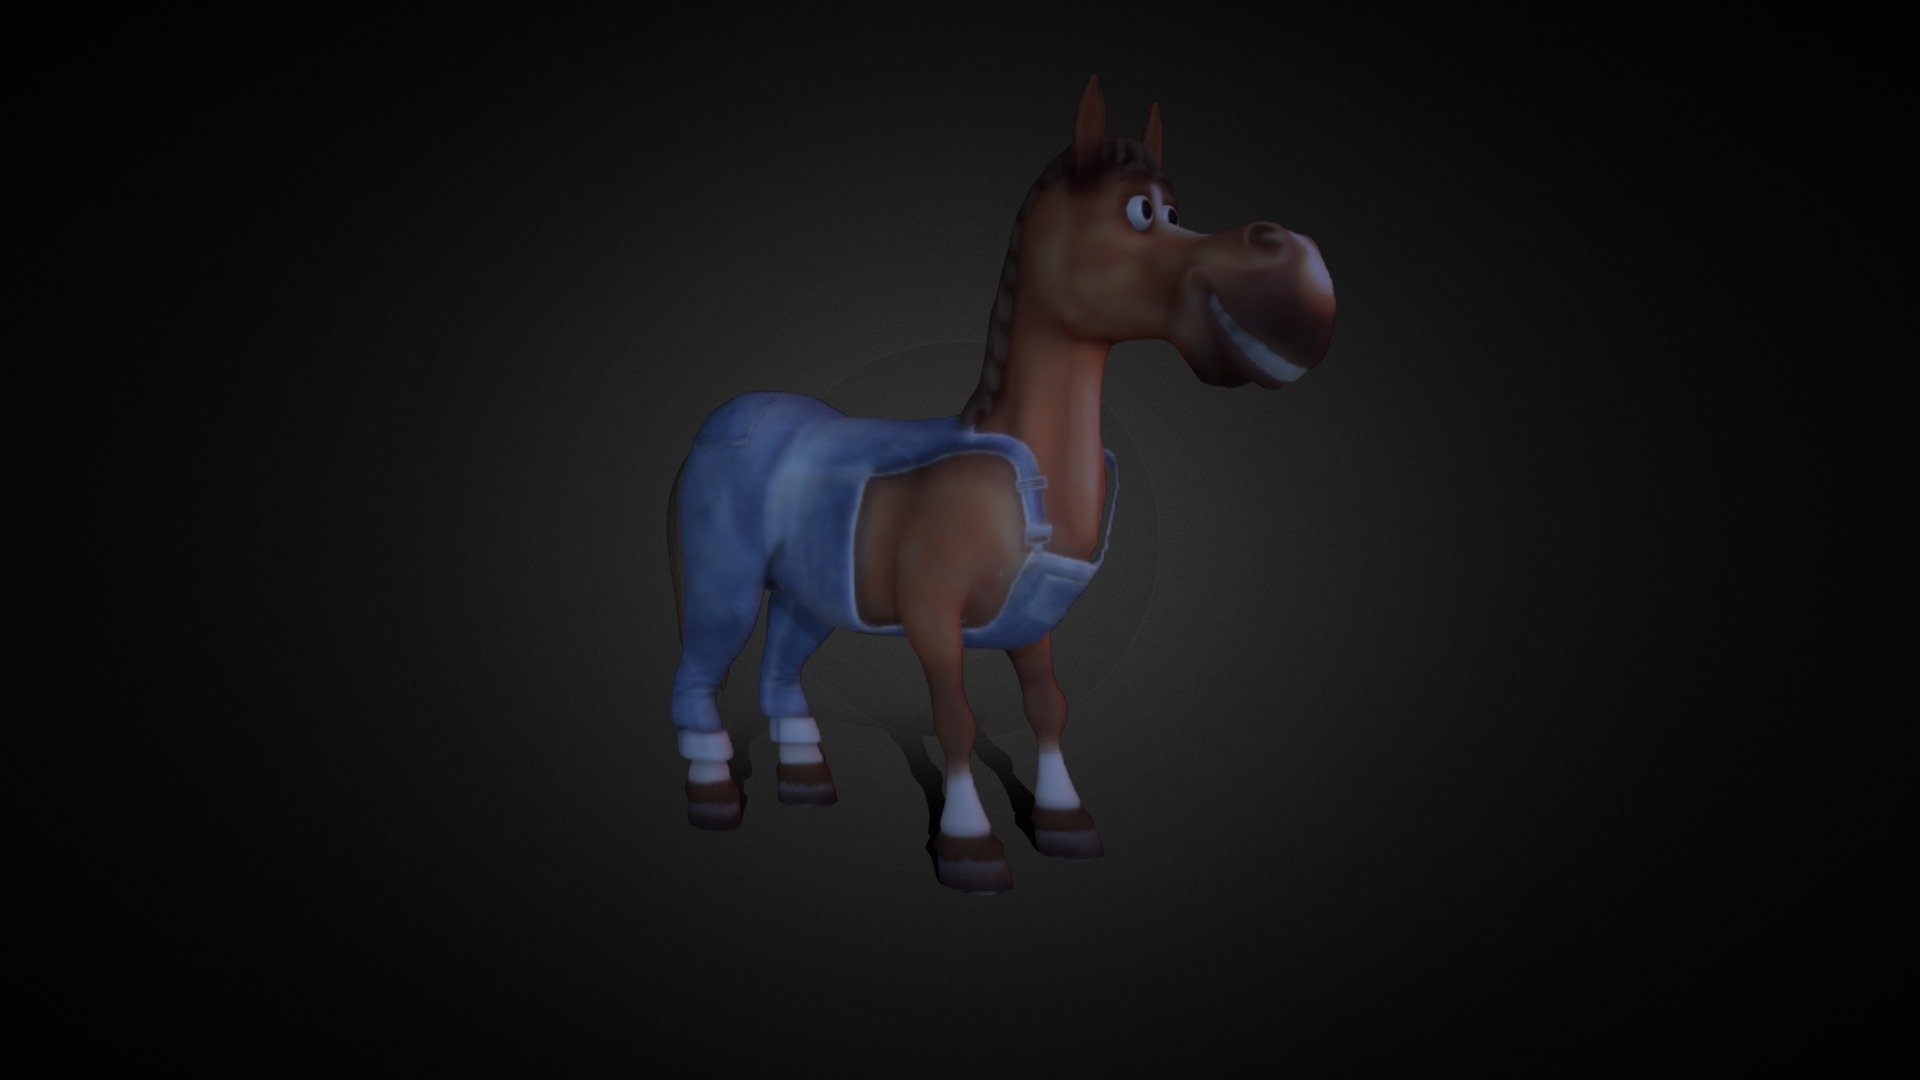 Ectenic rigged the Horse and animated all clips for a Japanees
VR game experience.
We worked together with High Prio on this fun job 3d model